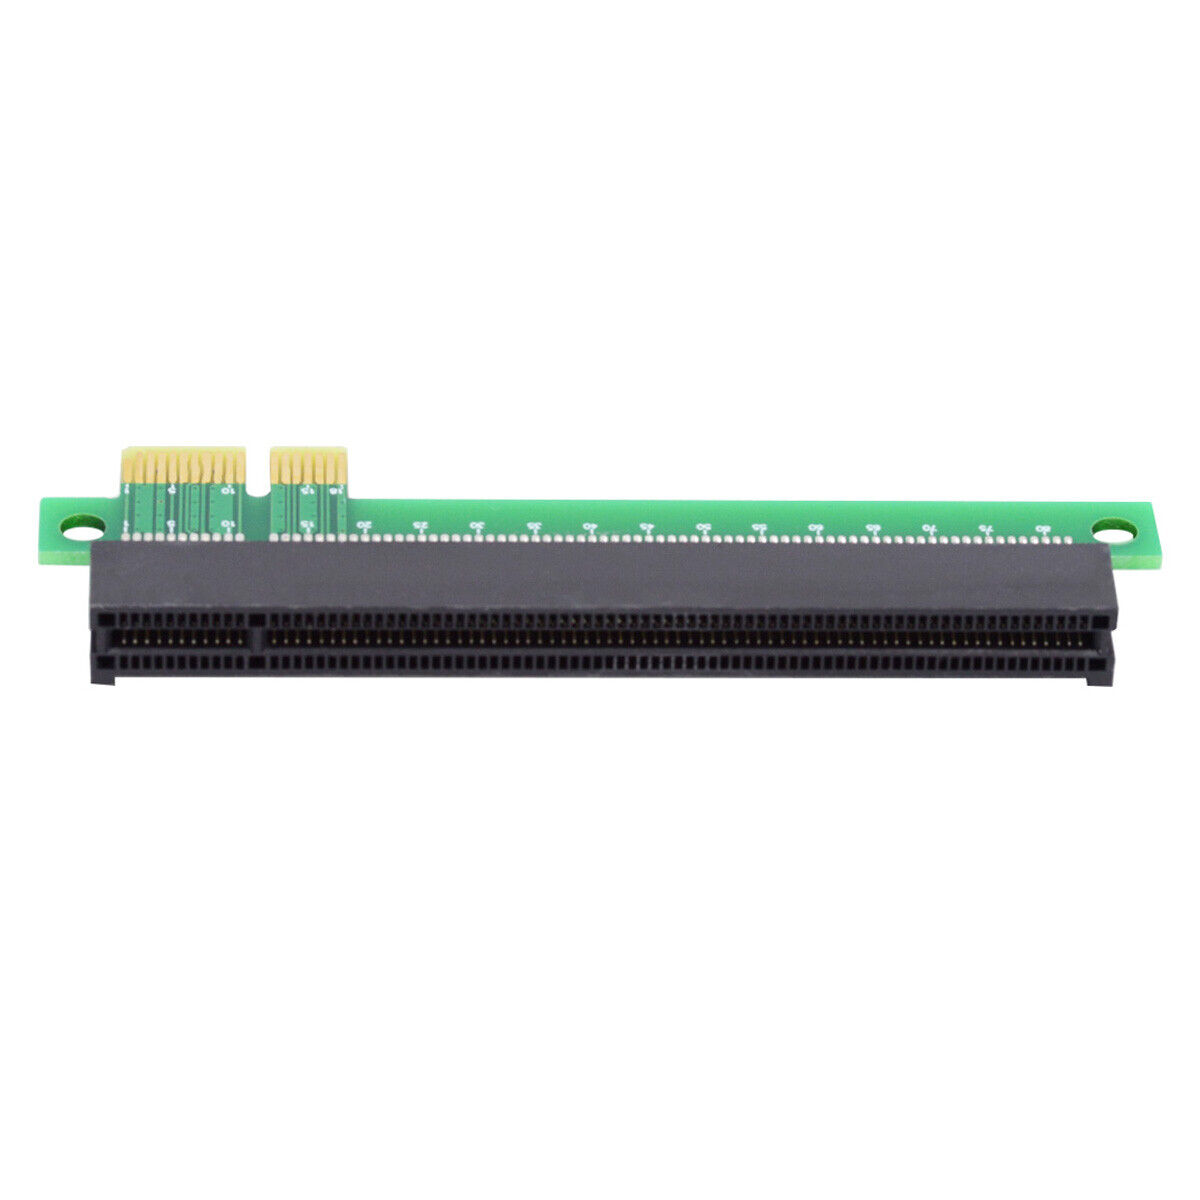 CABLECY PCI-E Express 1x to 16x Extender Converter Riser Card Male to Female